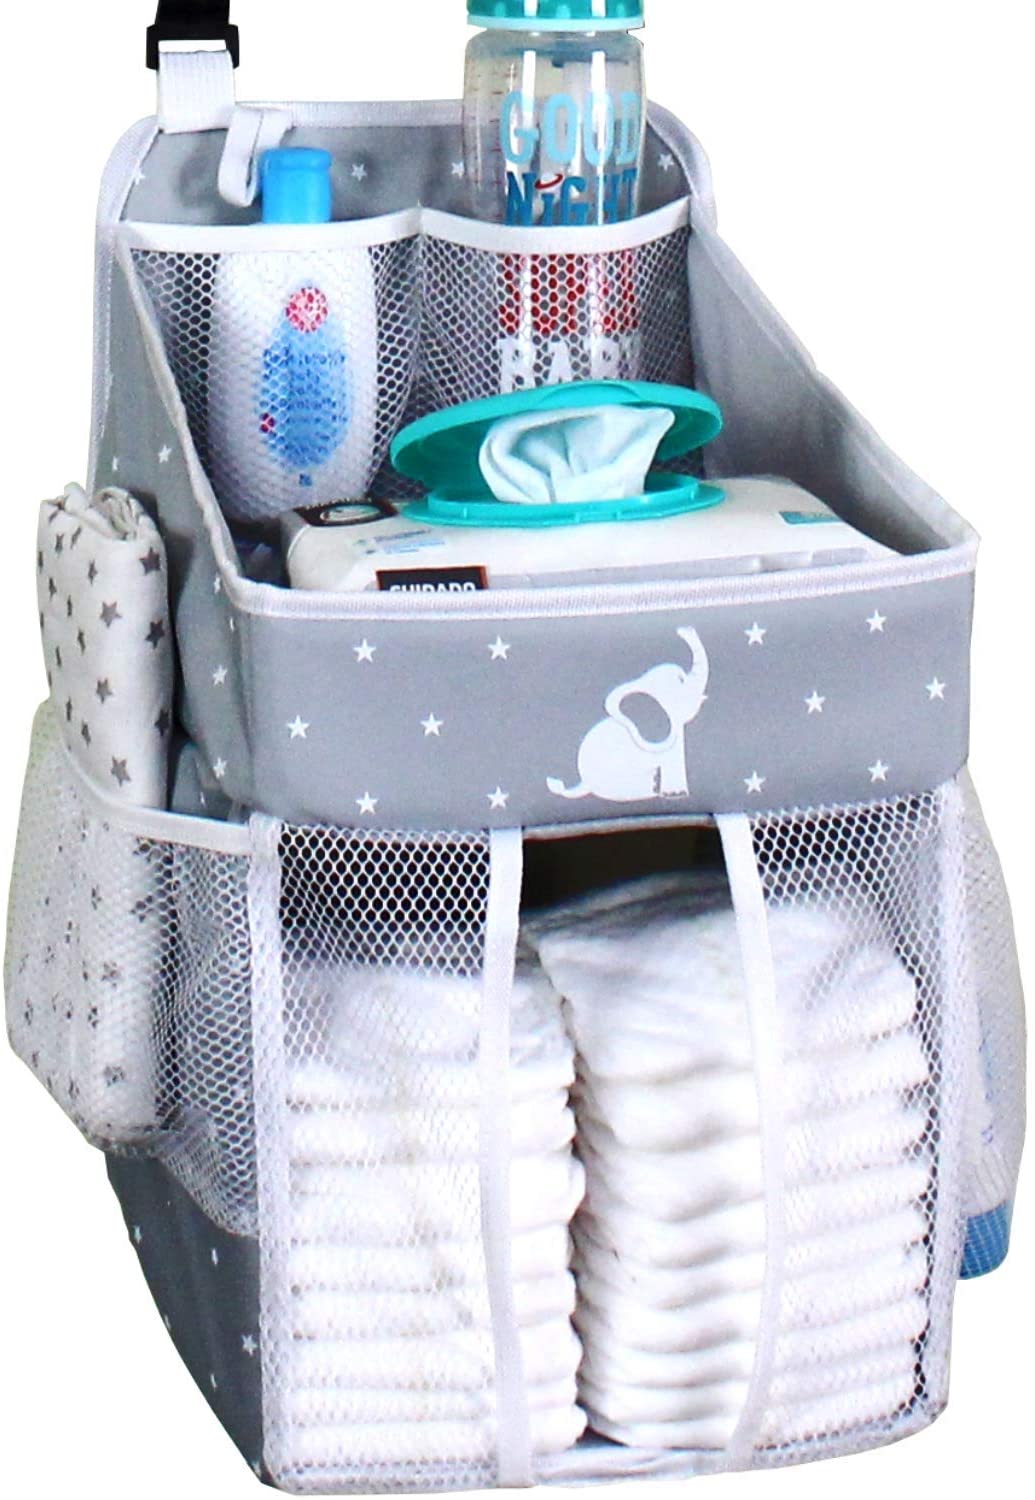 Nursery Organizer Diaper Caddy Organizer Crib Baby Bed Hanging Bag Infant Diaper Clothes Wipes Storage Hanging Bag Large Capacity Organizer for Store Baby Diapers Gray 43 x 25 Pacifiers